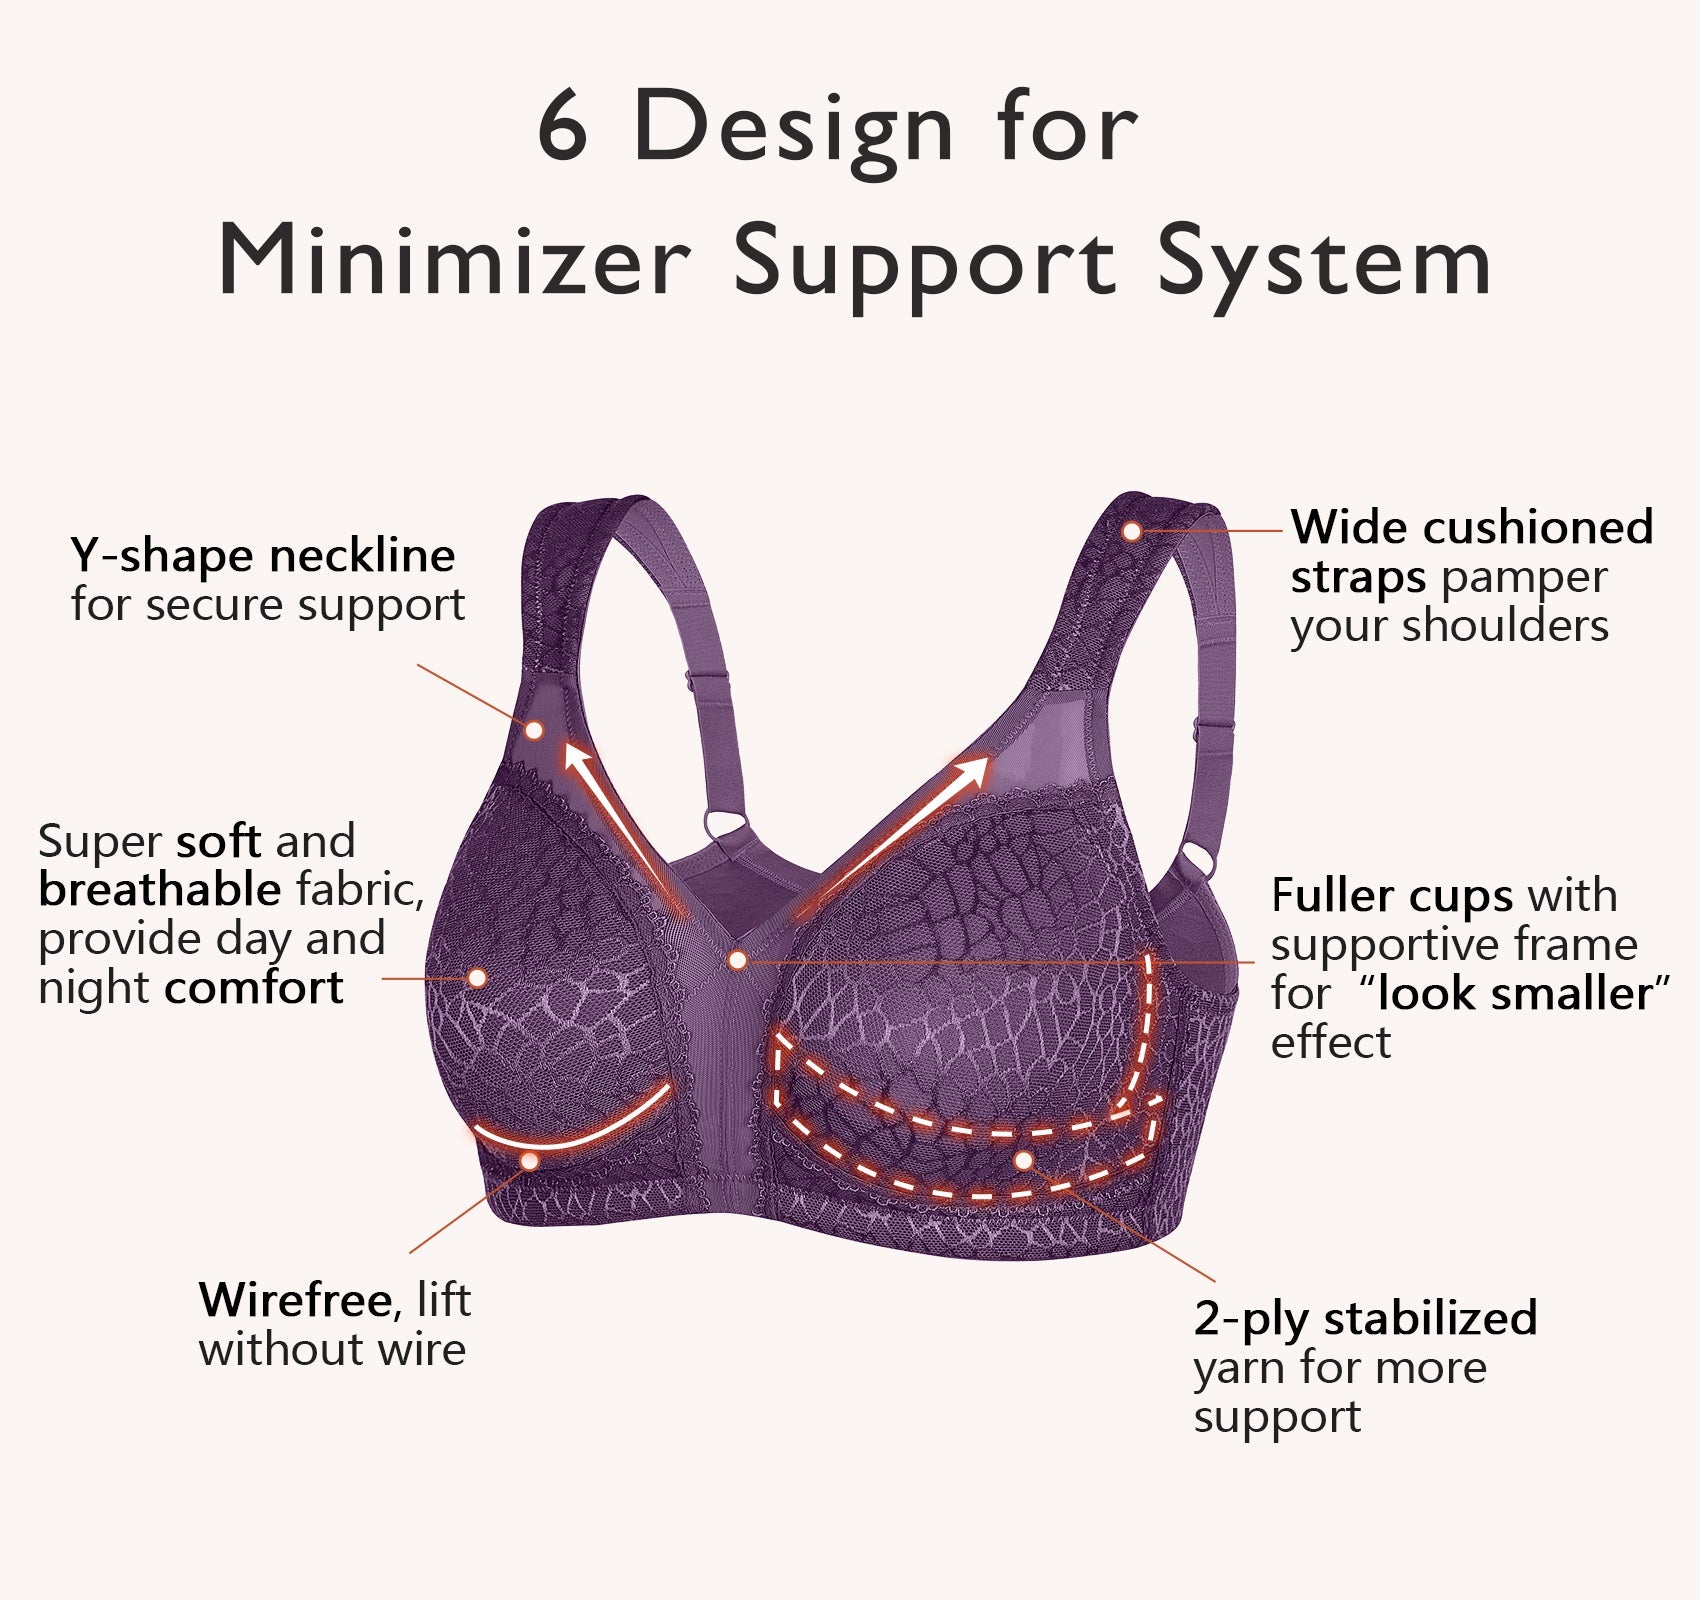 Bra designed with algorithms to hit stores